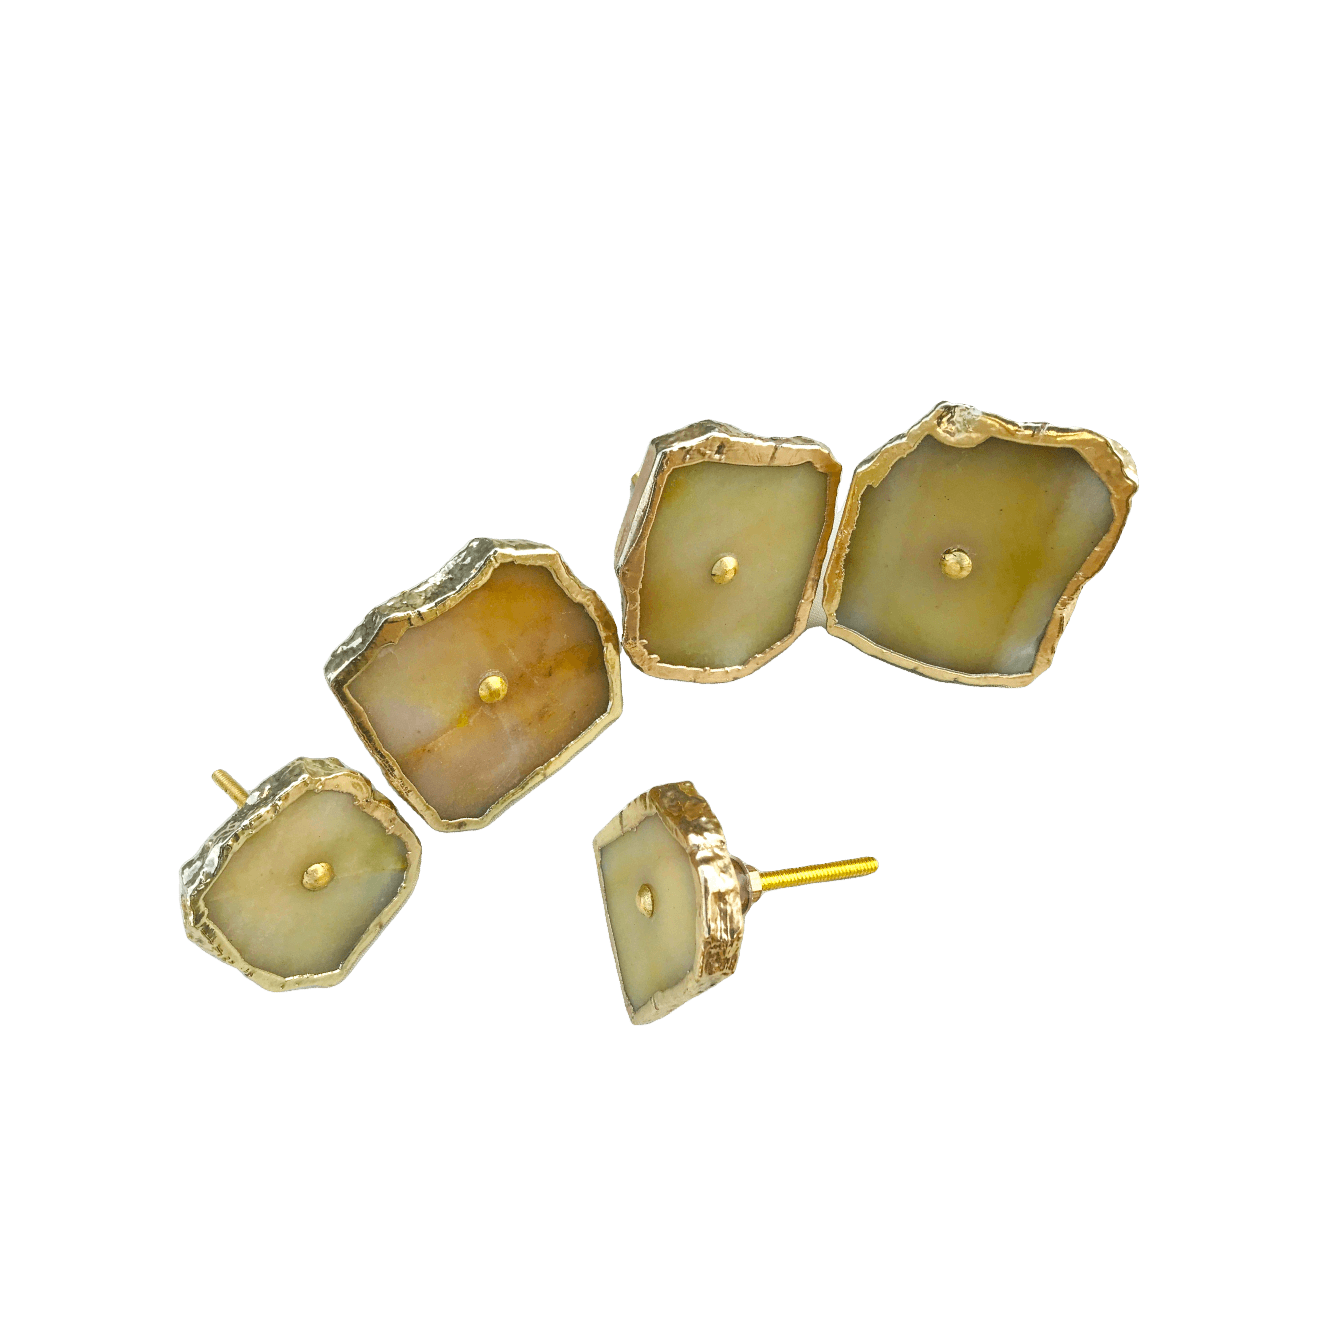 Mustard Agate Cabinet Door Pull Handle - Set of 6 - MAIA HOMES